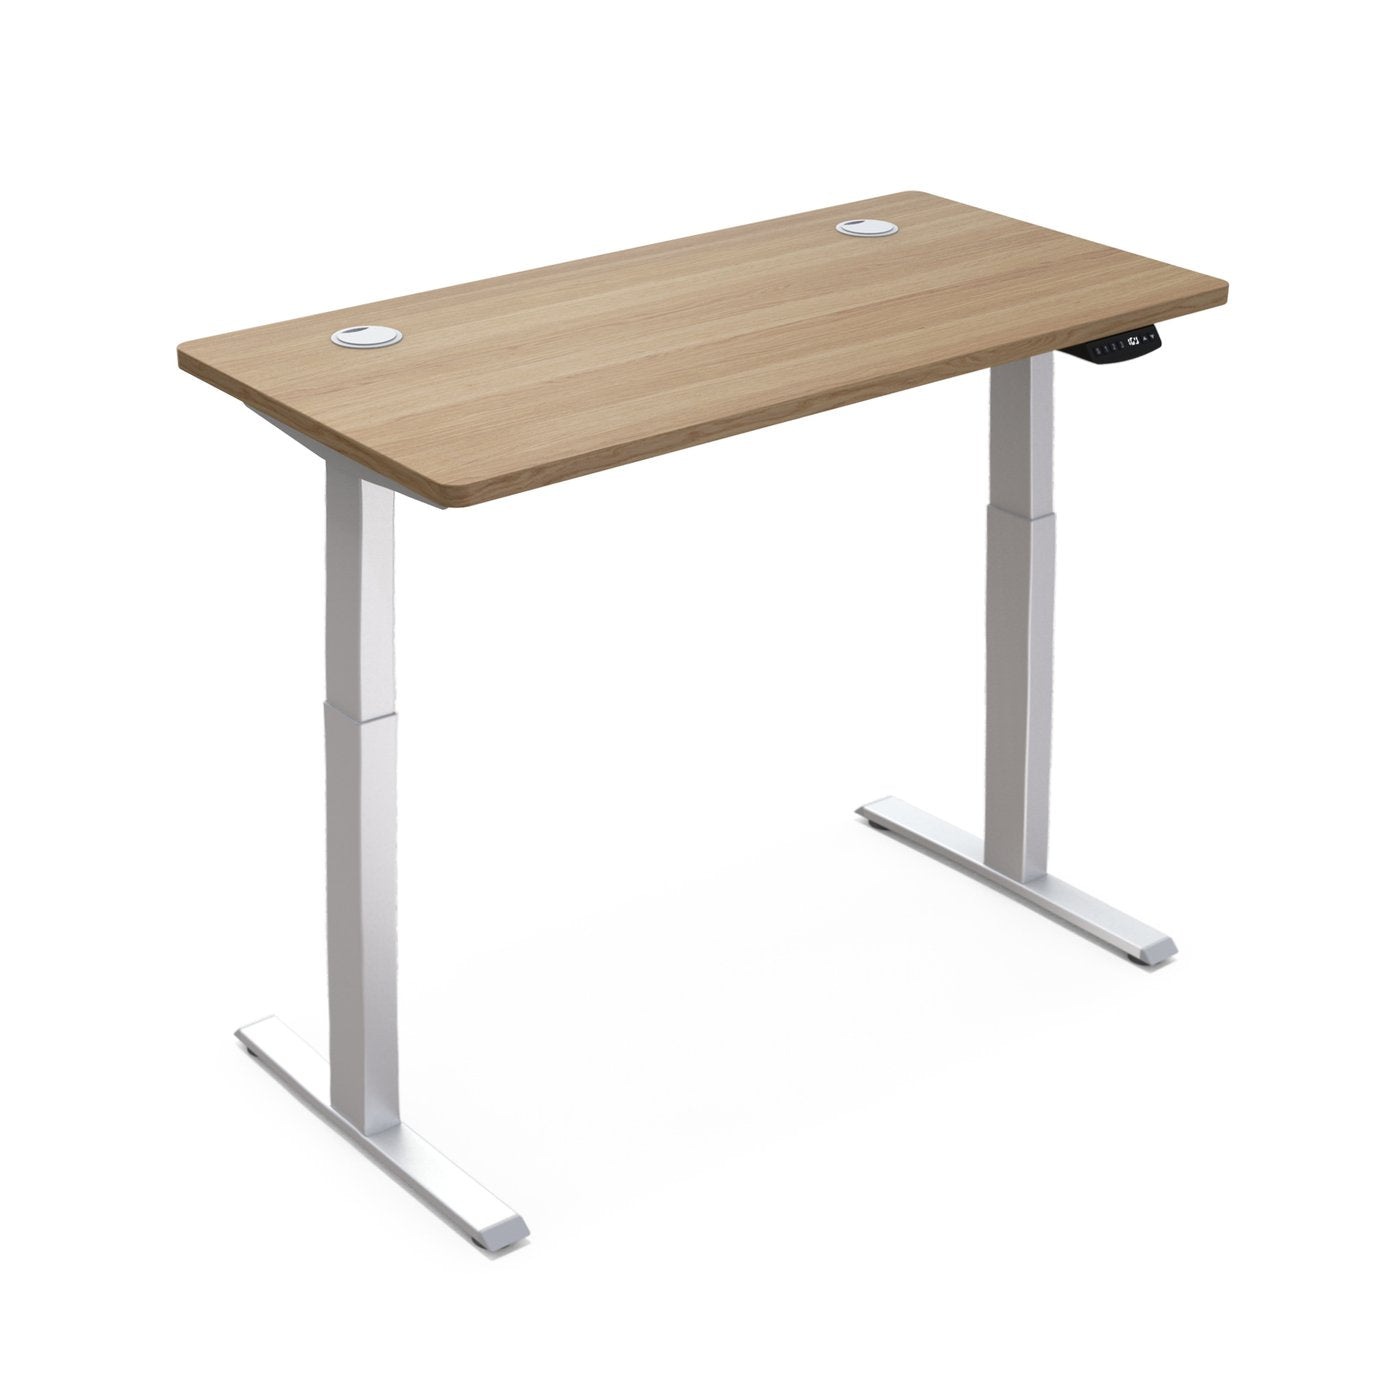 Bella Electric Height Adjustable Standing Desks with Rectangular Tabletop (55"x 31.5") for Home Office Workstation with 4 Color Option